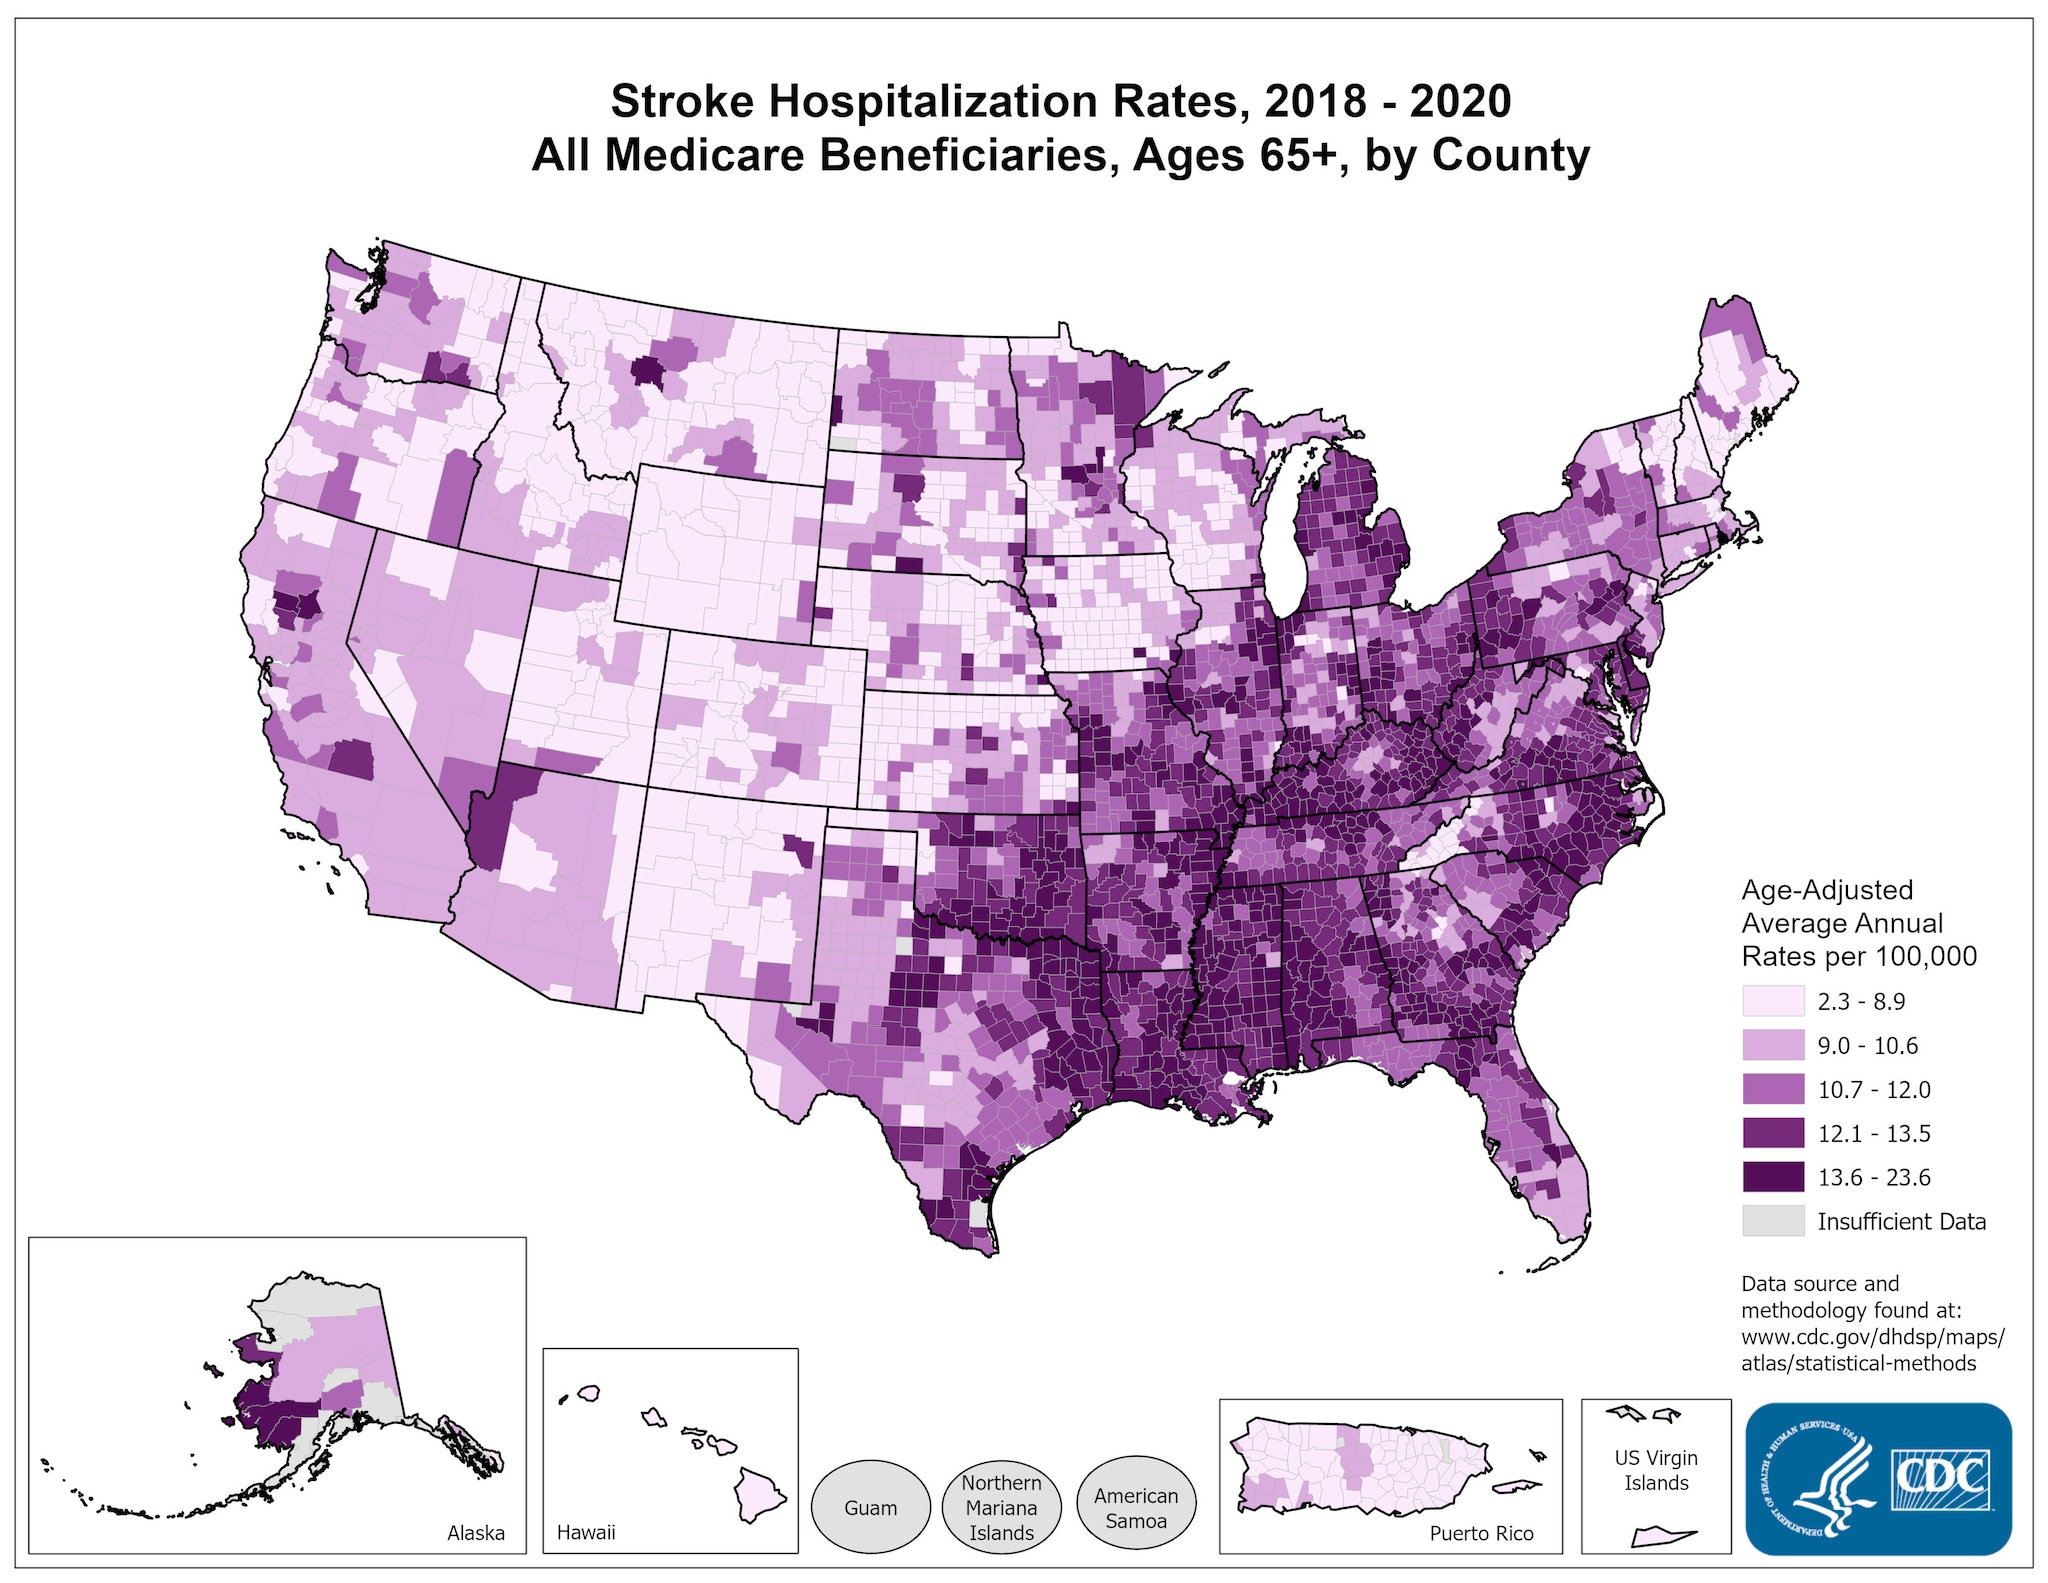 Stroke Hospitalization Rates for 2018 through 2020 for Adults Aged 65 Years and Older by County